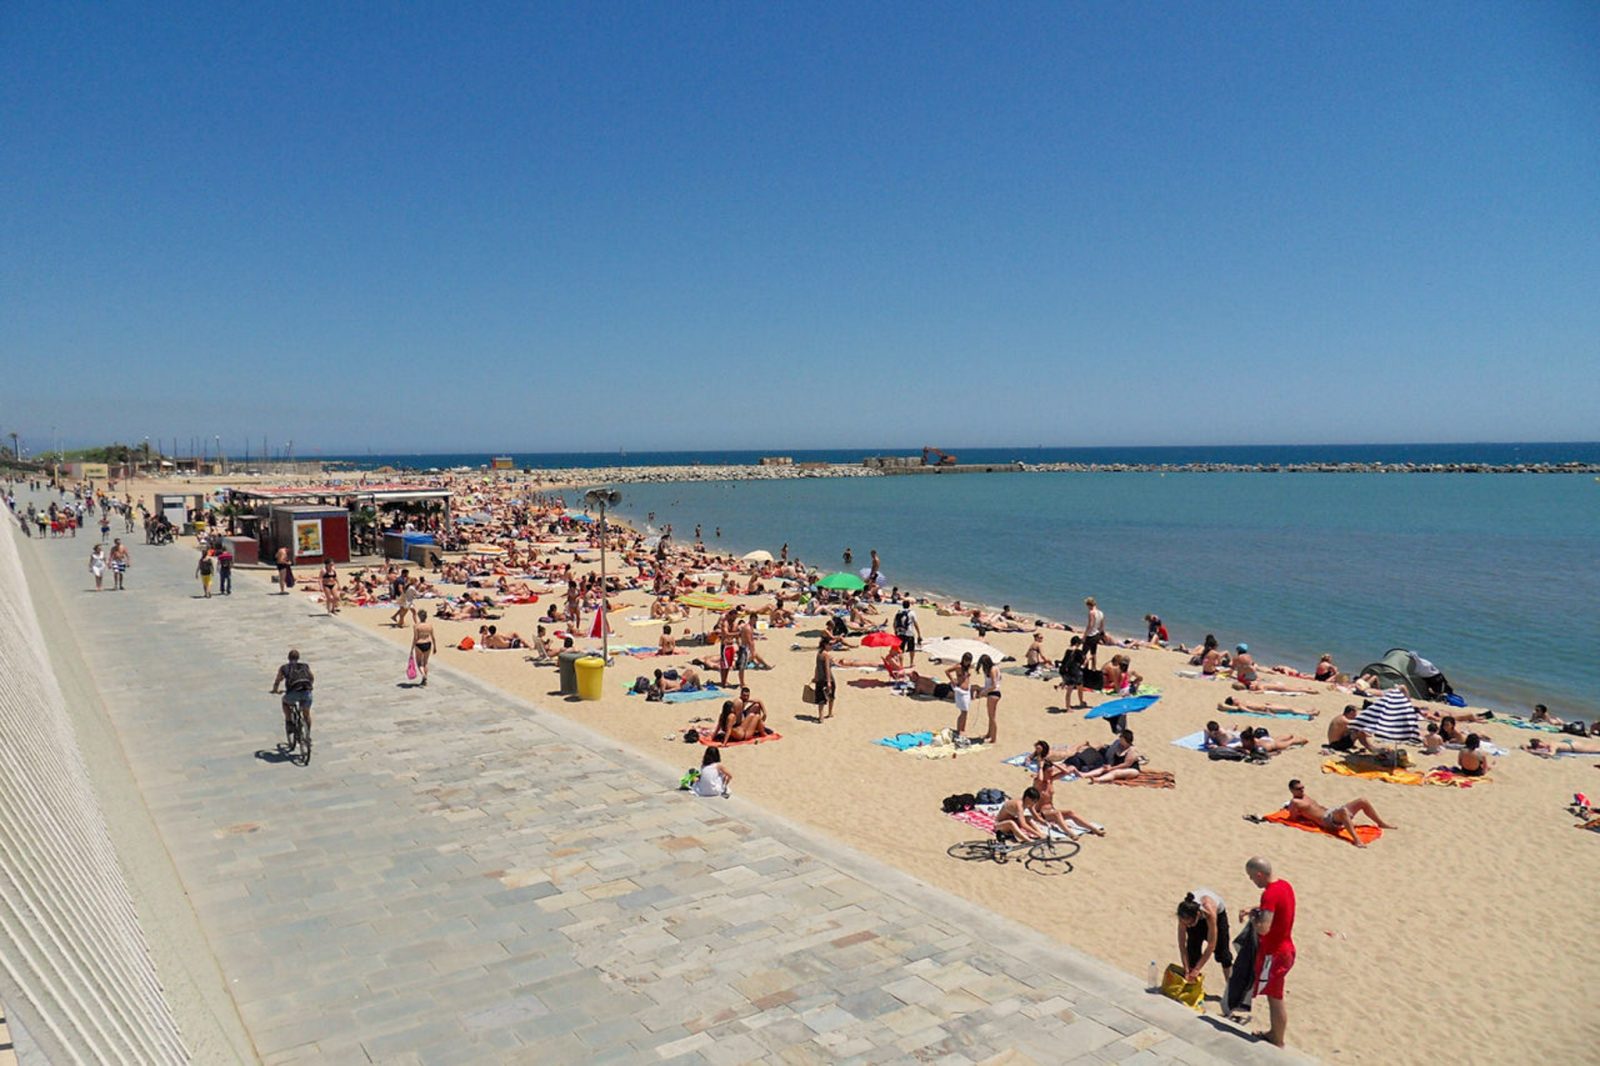 Bogatel is one of the best "Olympic" beaches in Barcelona